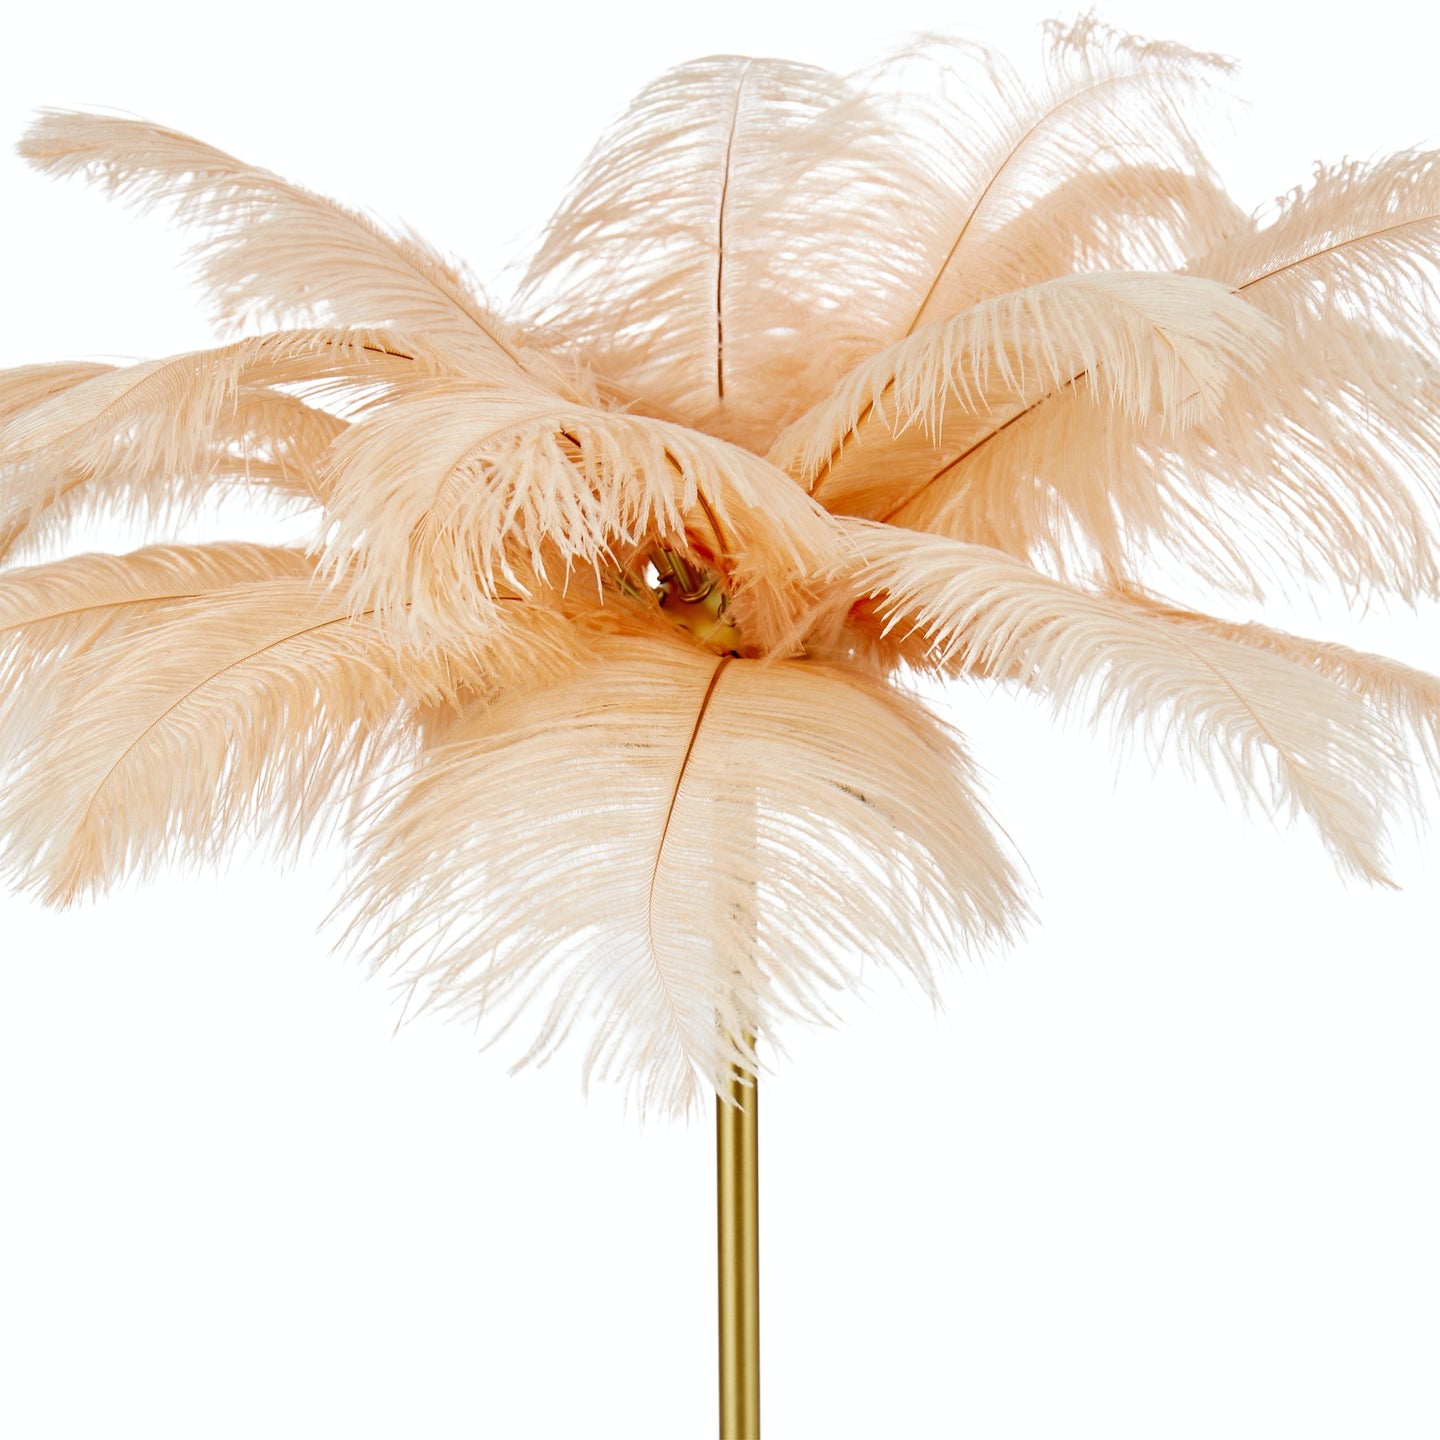 Society Home Feathered Brass Table Lamp Peach/Brass 65x65x68cm